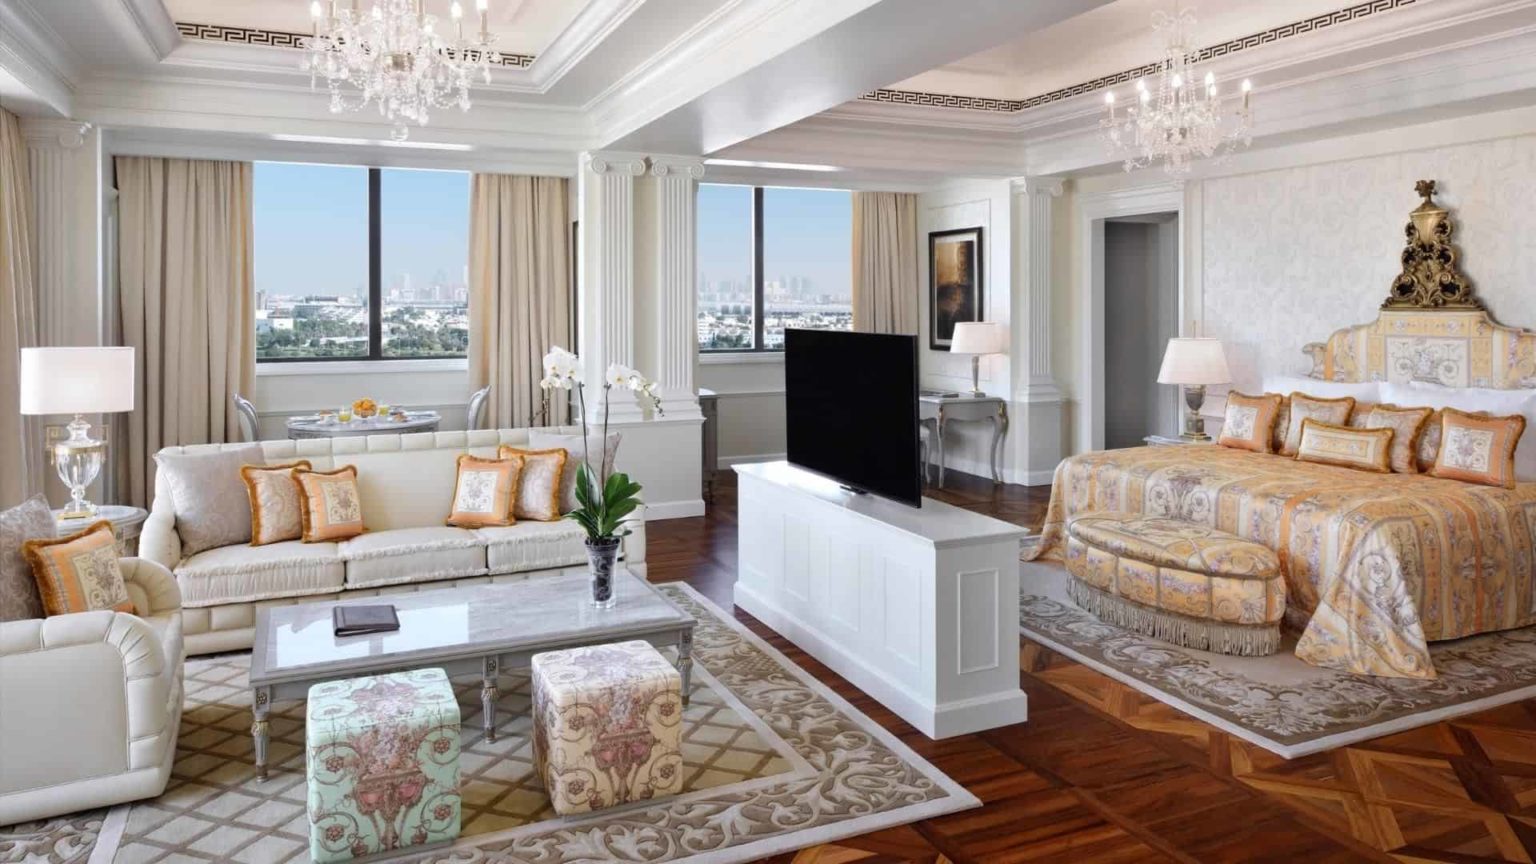 Palazzo Versace Dubai Hotel bedroom suite with king bed, sofa, TV, and panoramic views